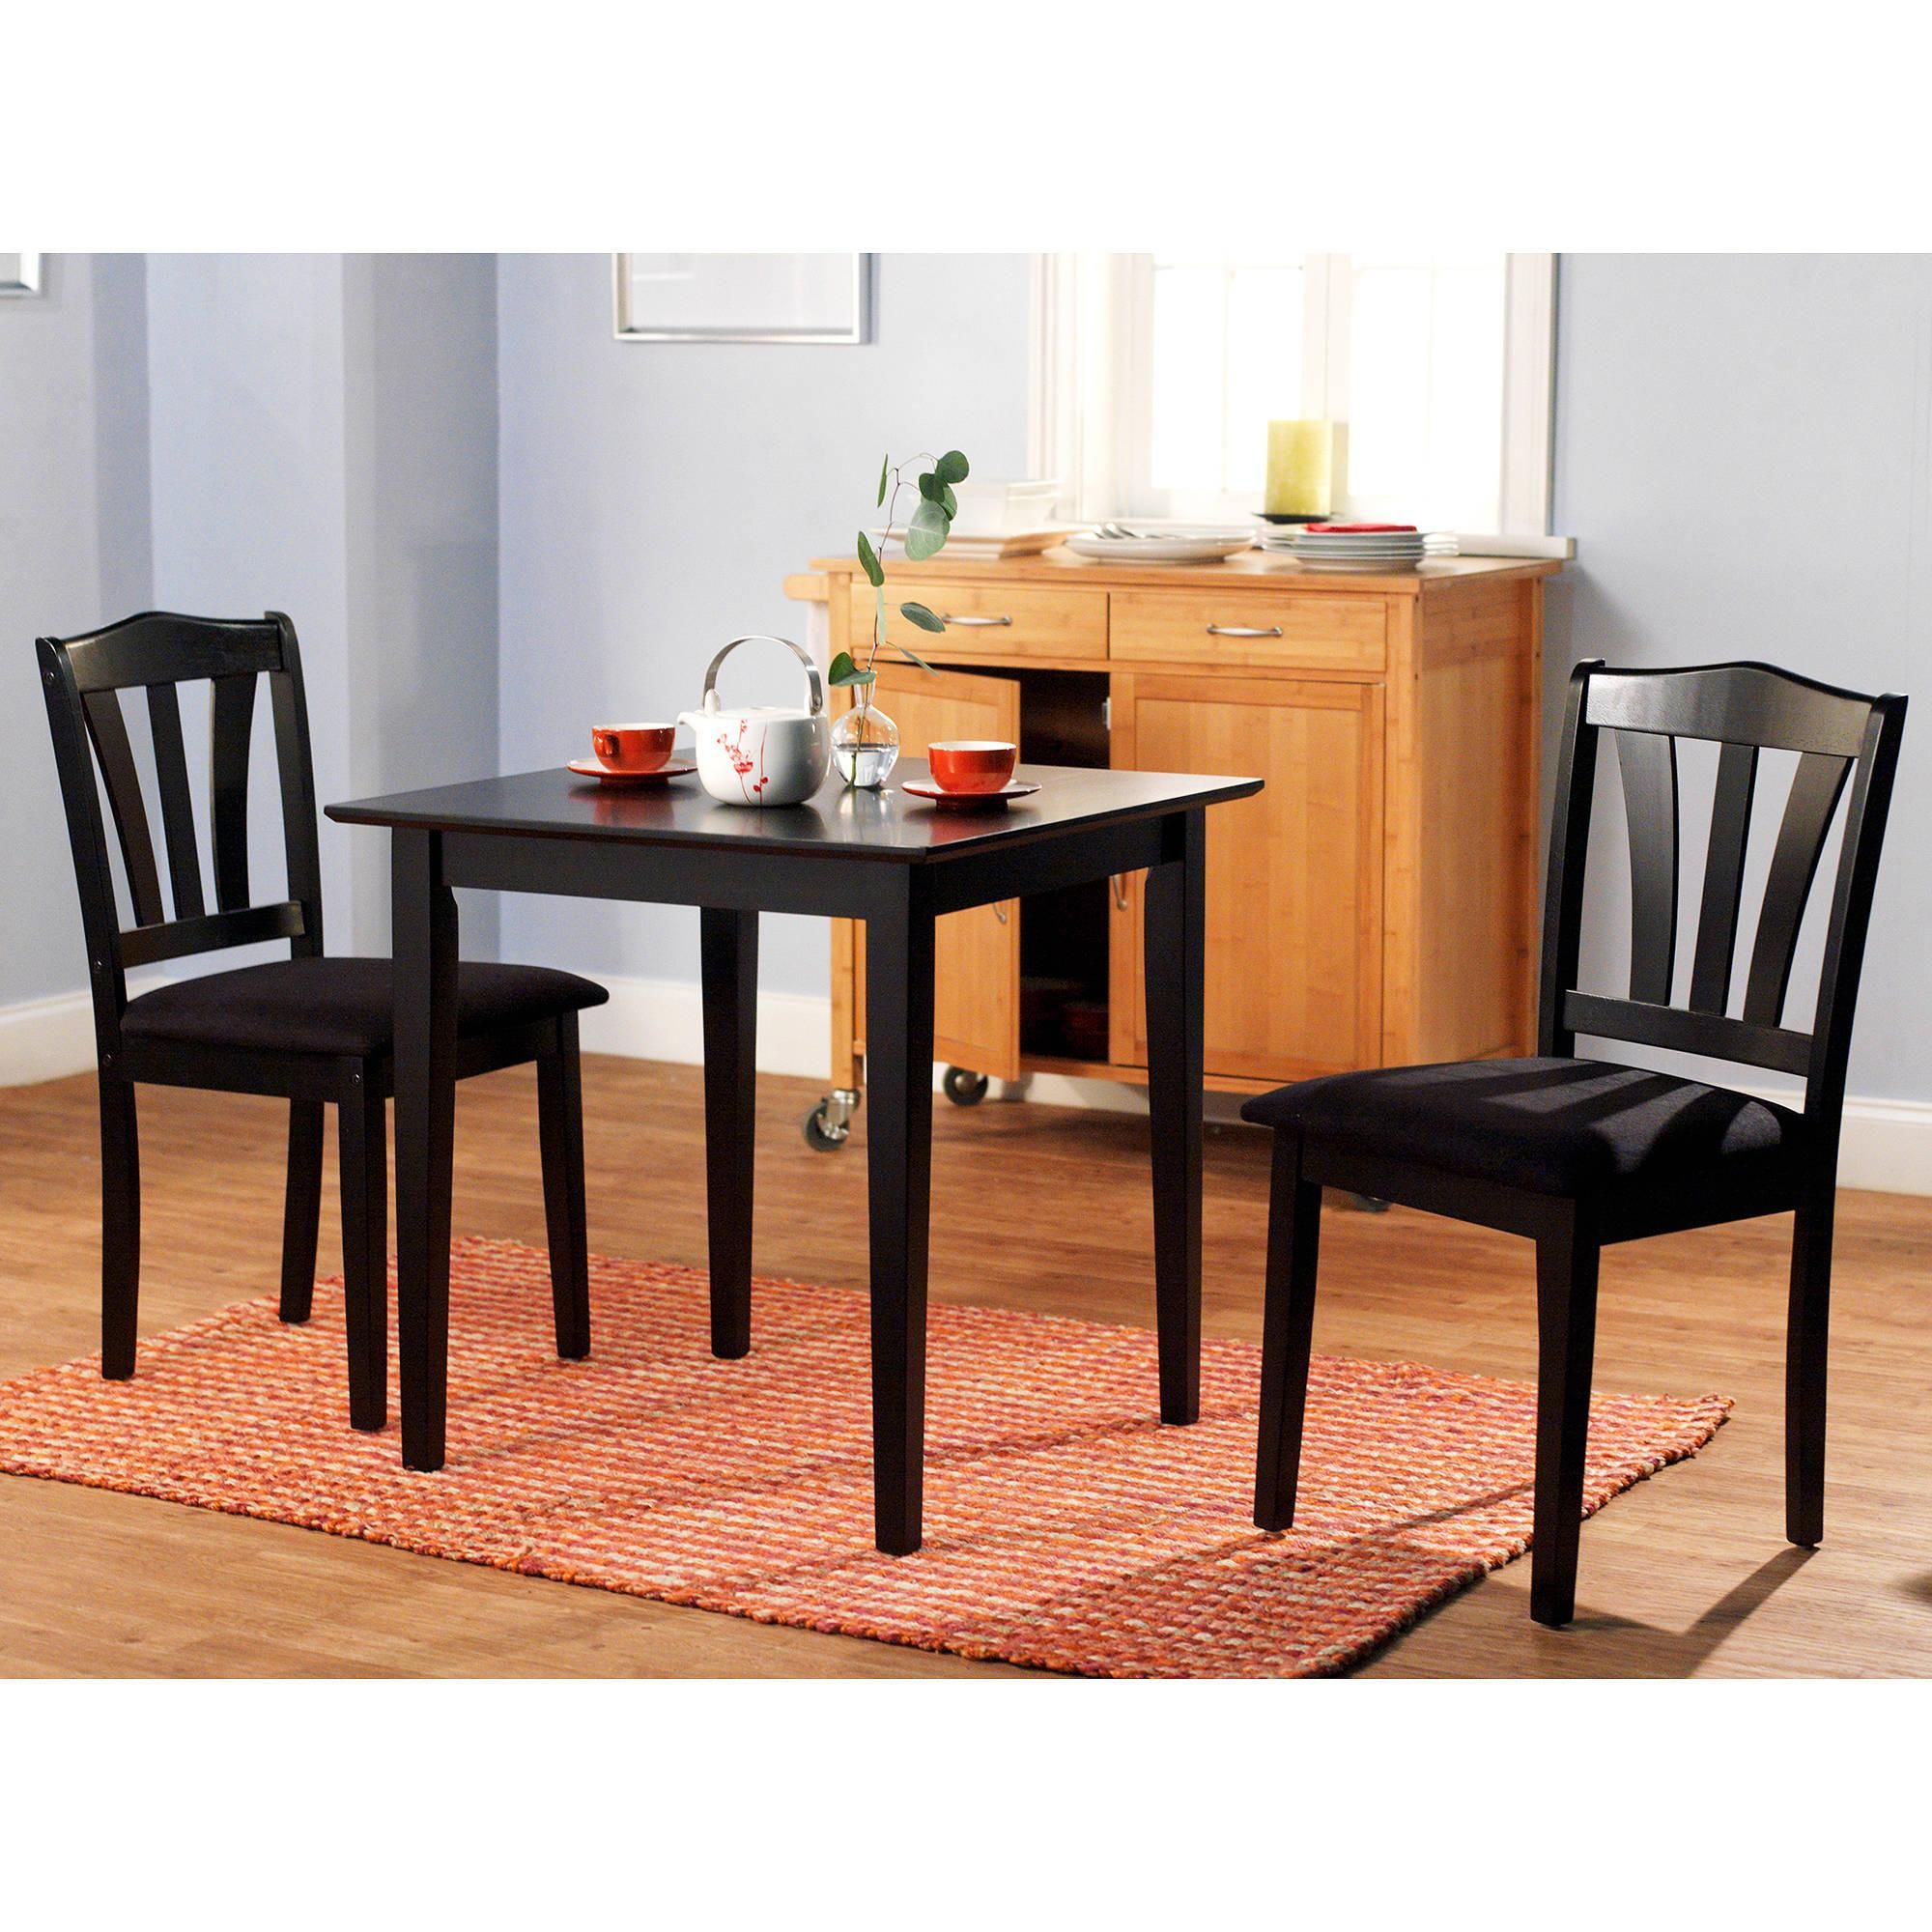 Details About 3 Piece Dining Set Table 2 Chairs Kitchen Room Wood Furniture  Dinette Modern New With Most Up To Date 3 Piece Dining Sets (Photo 35375 of 35622)